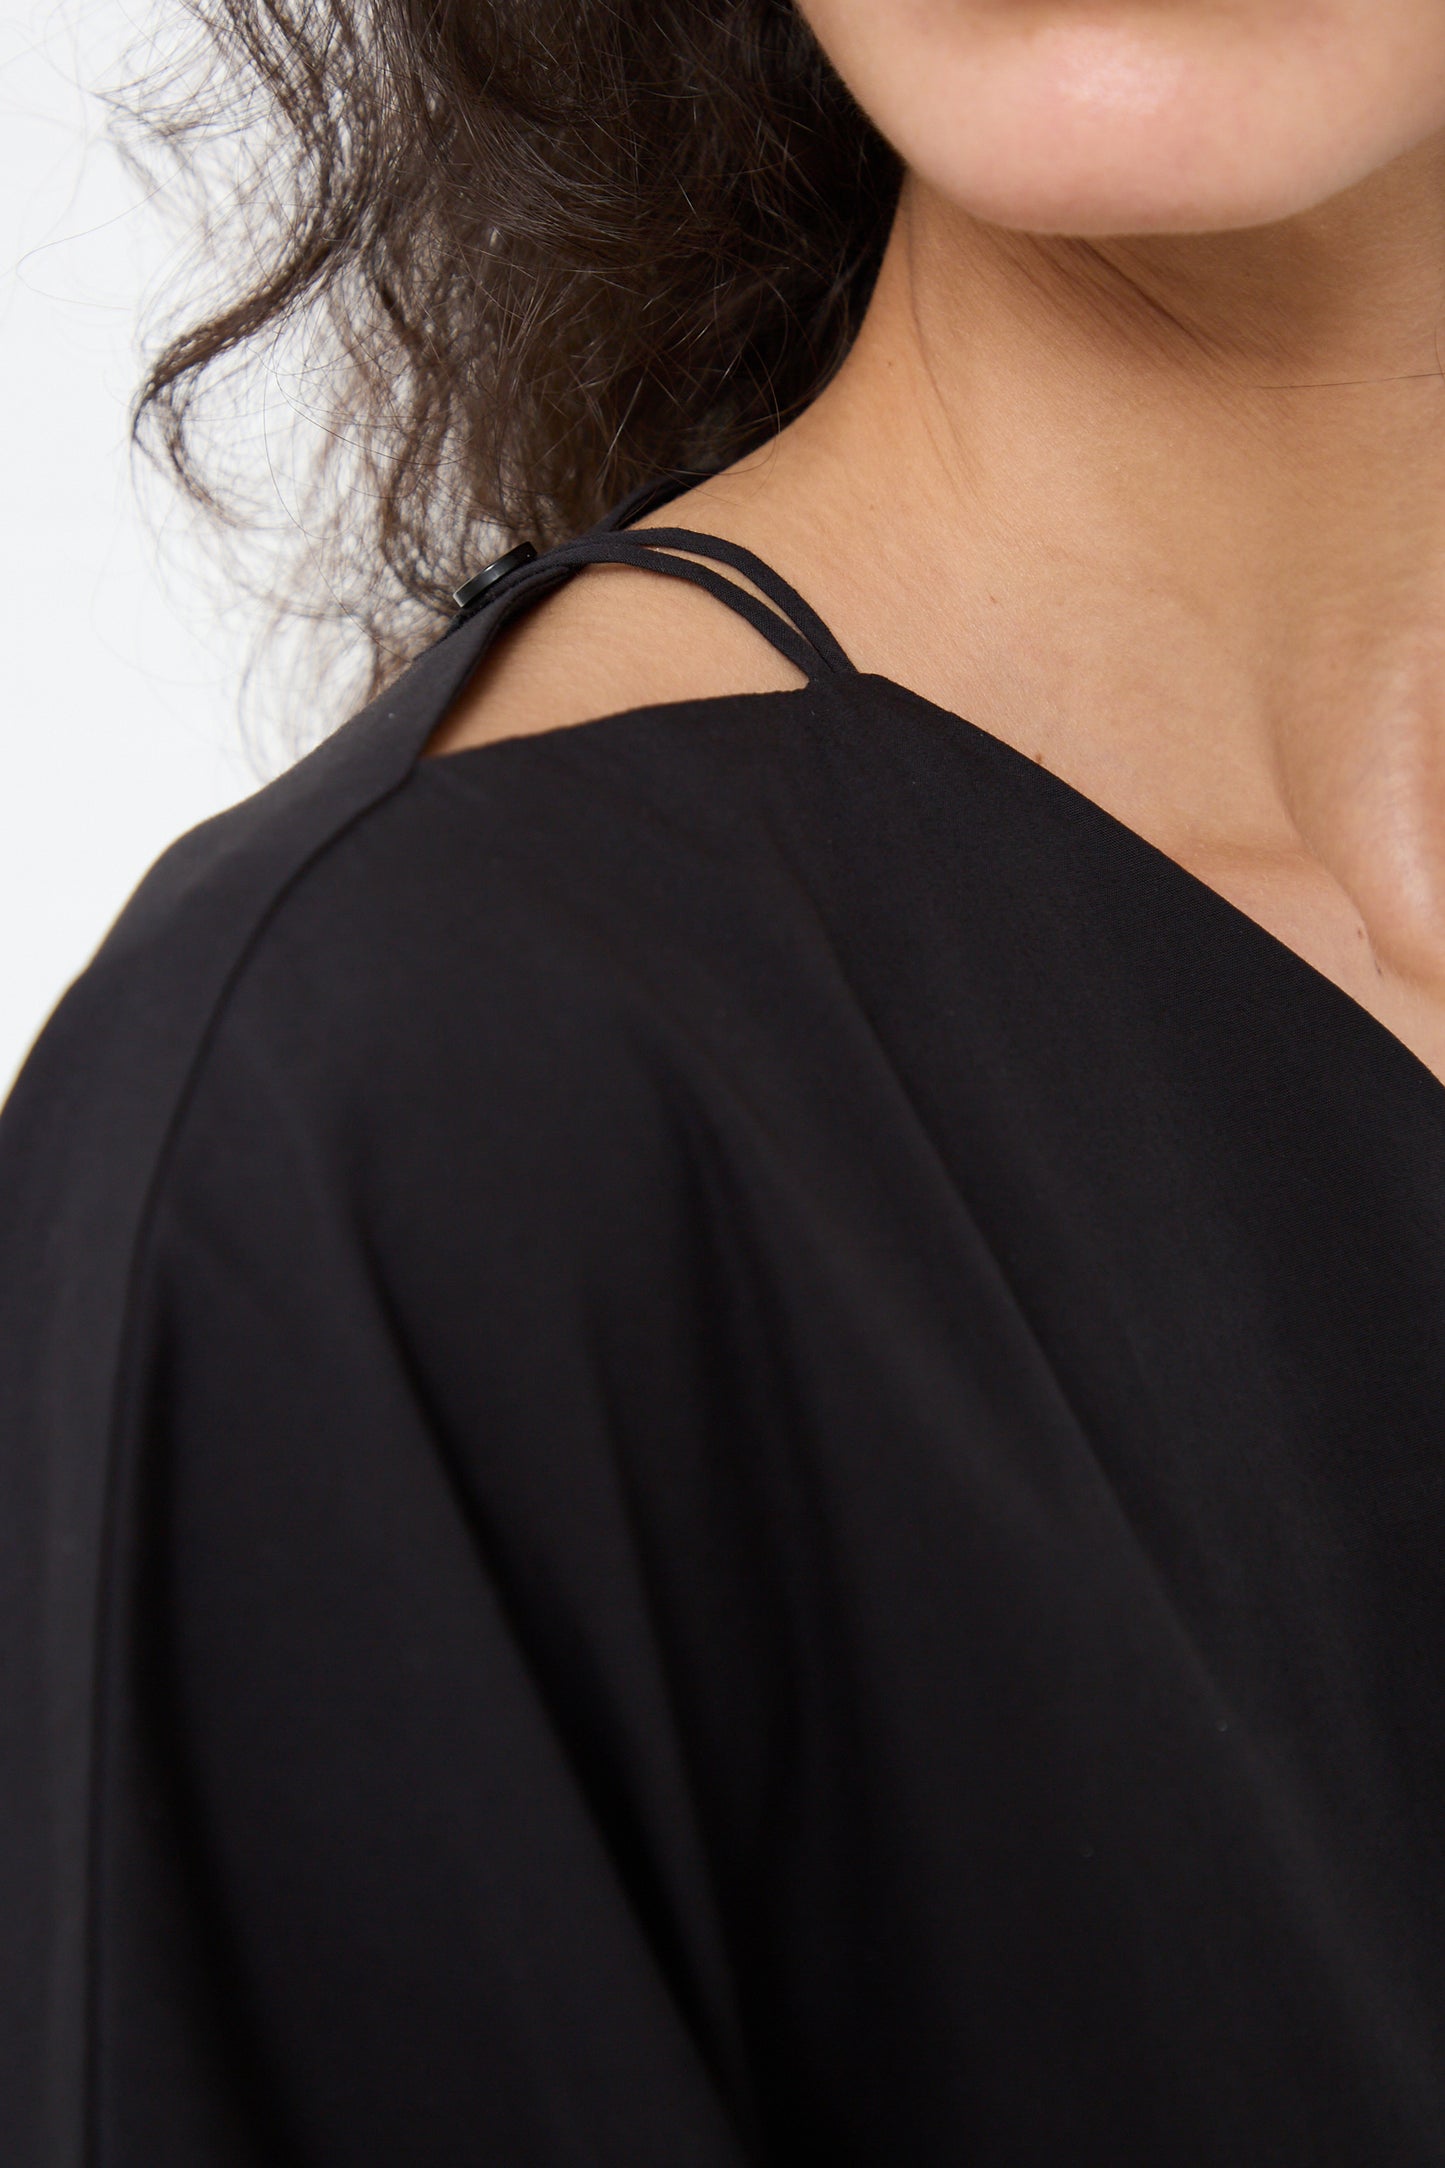 Close-up of a woman wearing a Black Crane Organic Cotton Star Neck Dress in Black with a visible strap.